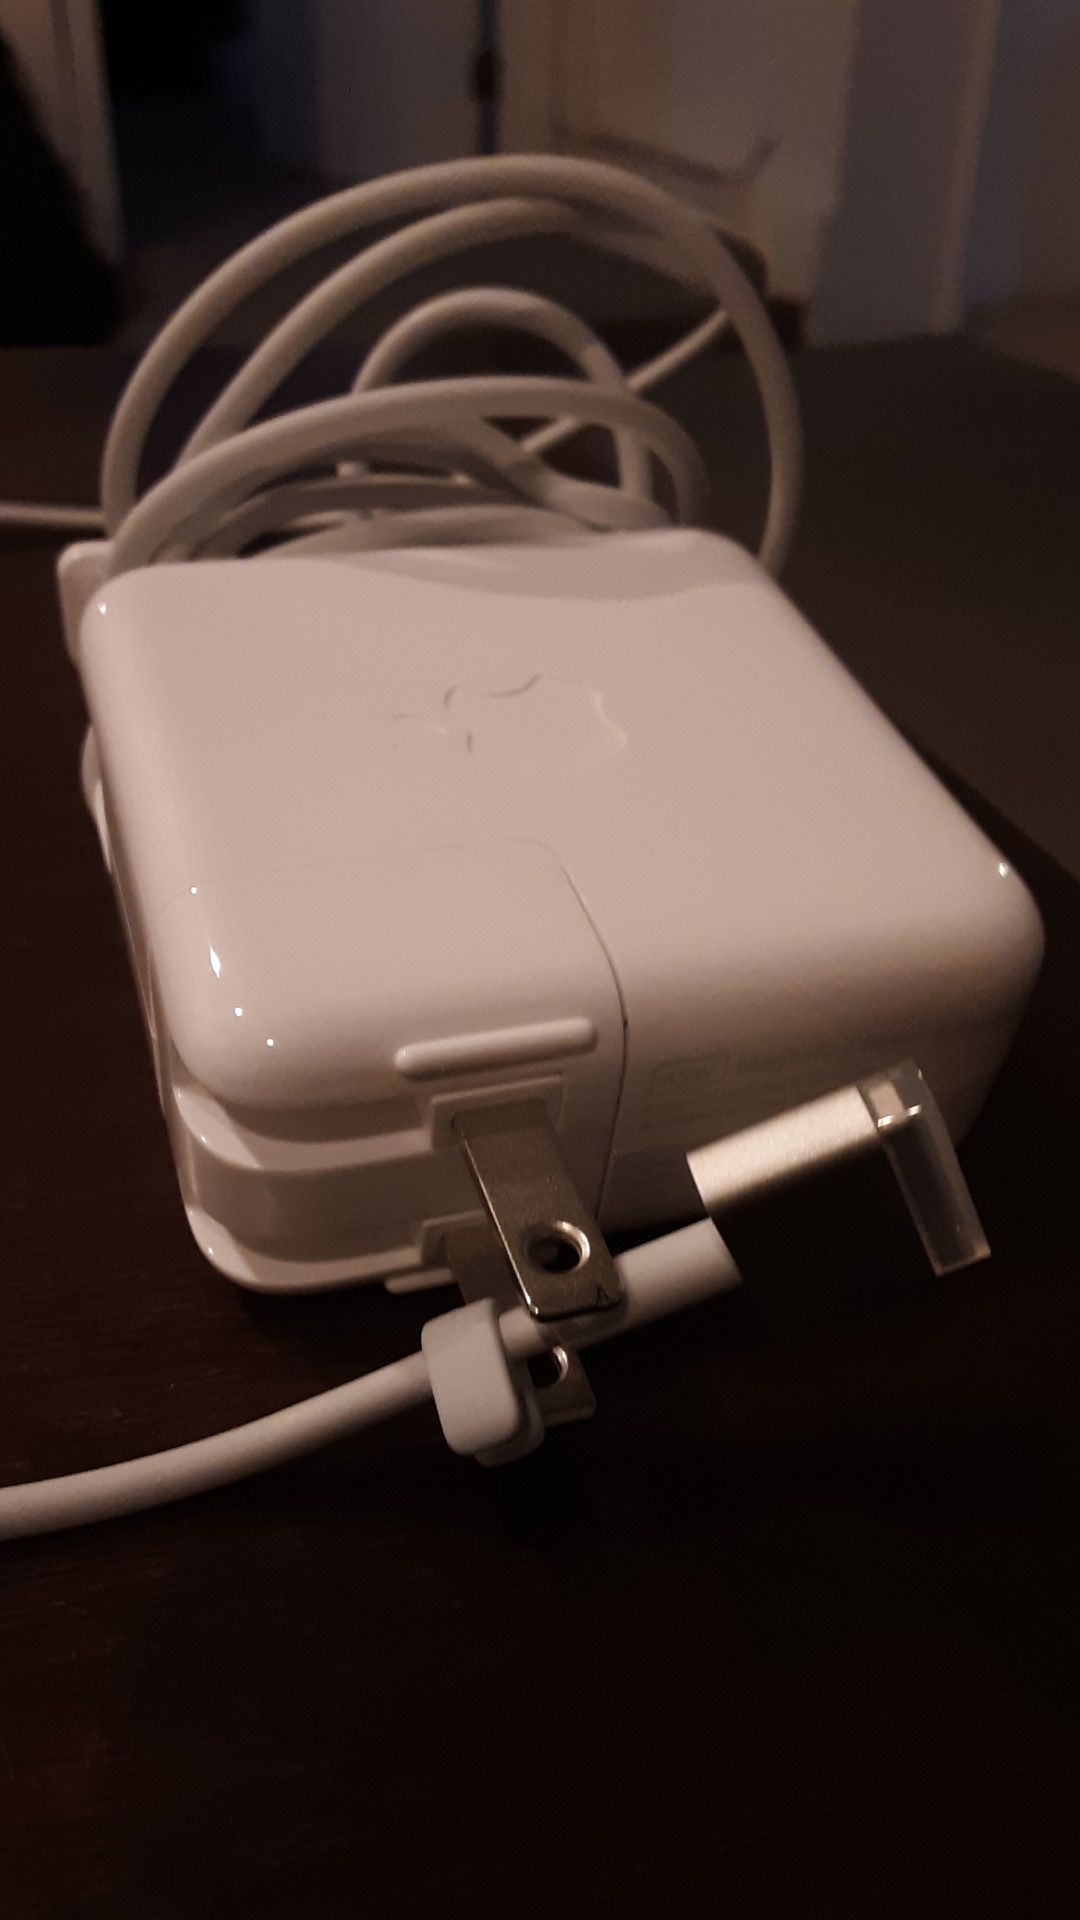 Macbook Air Charger NEW